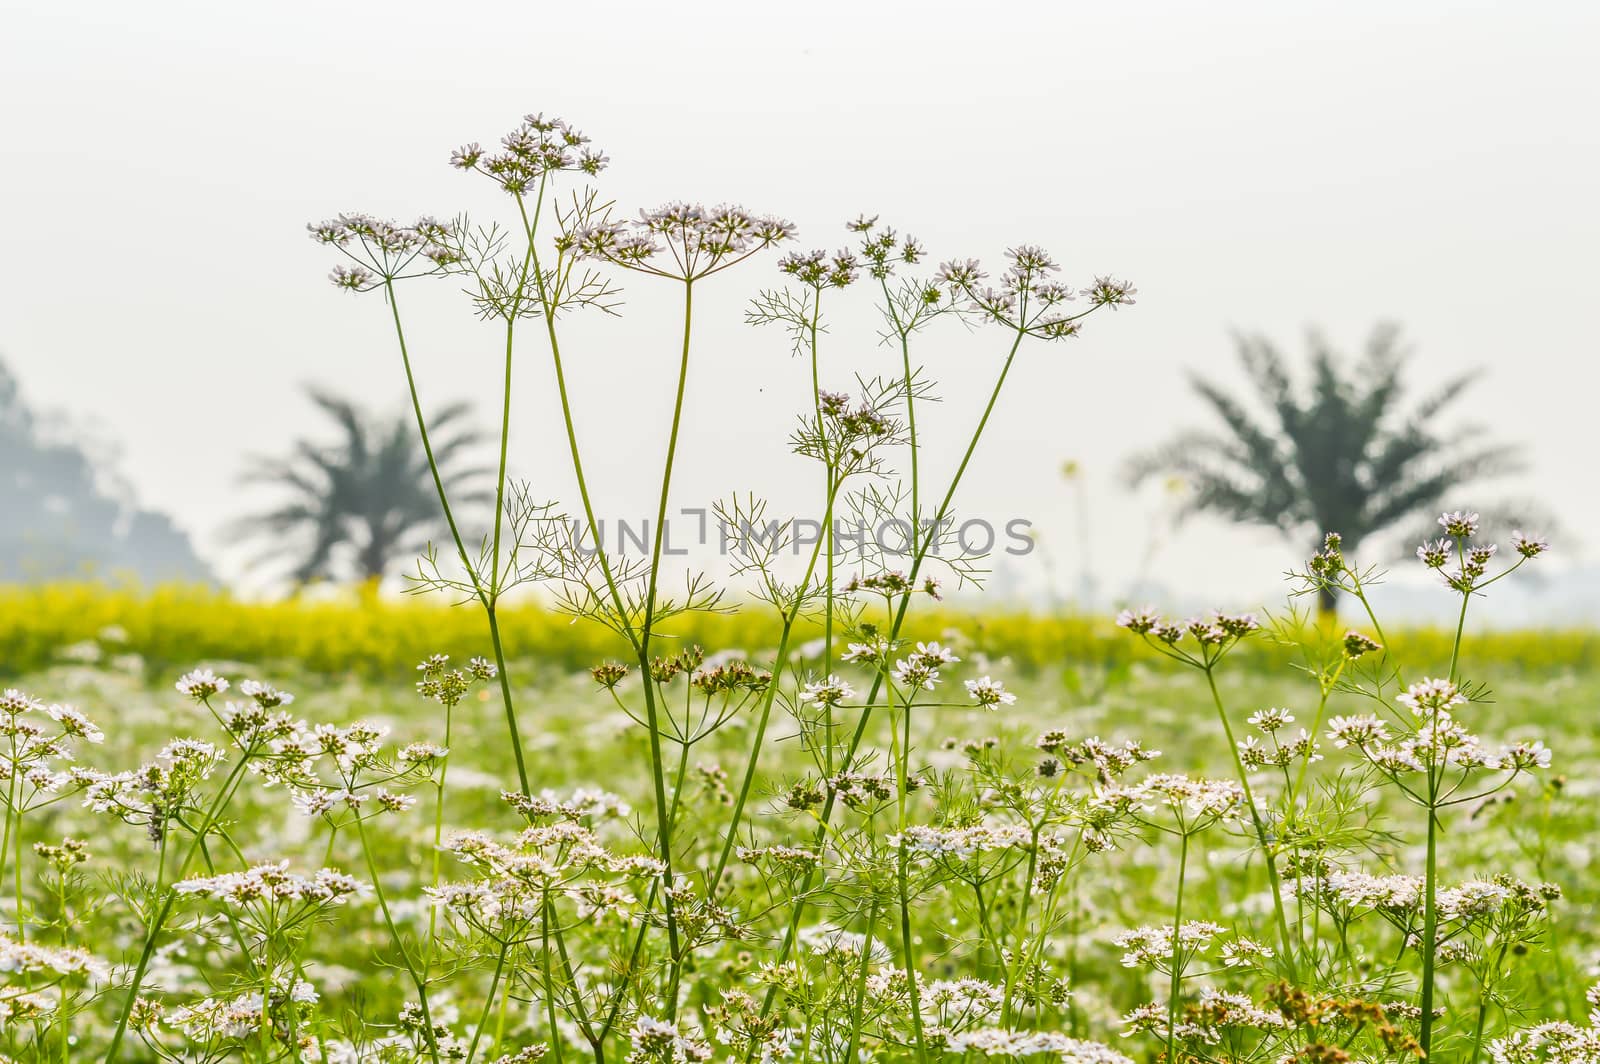 Colorful spring Landscape with yellow Rape: This is a photograph by sudiptabhowmick